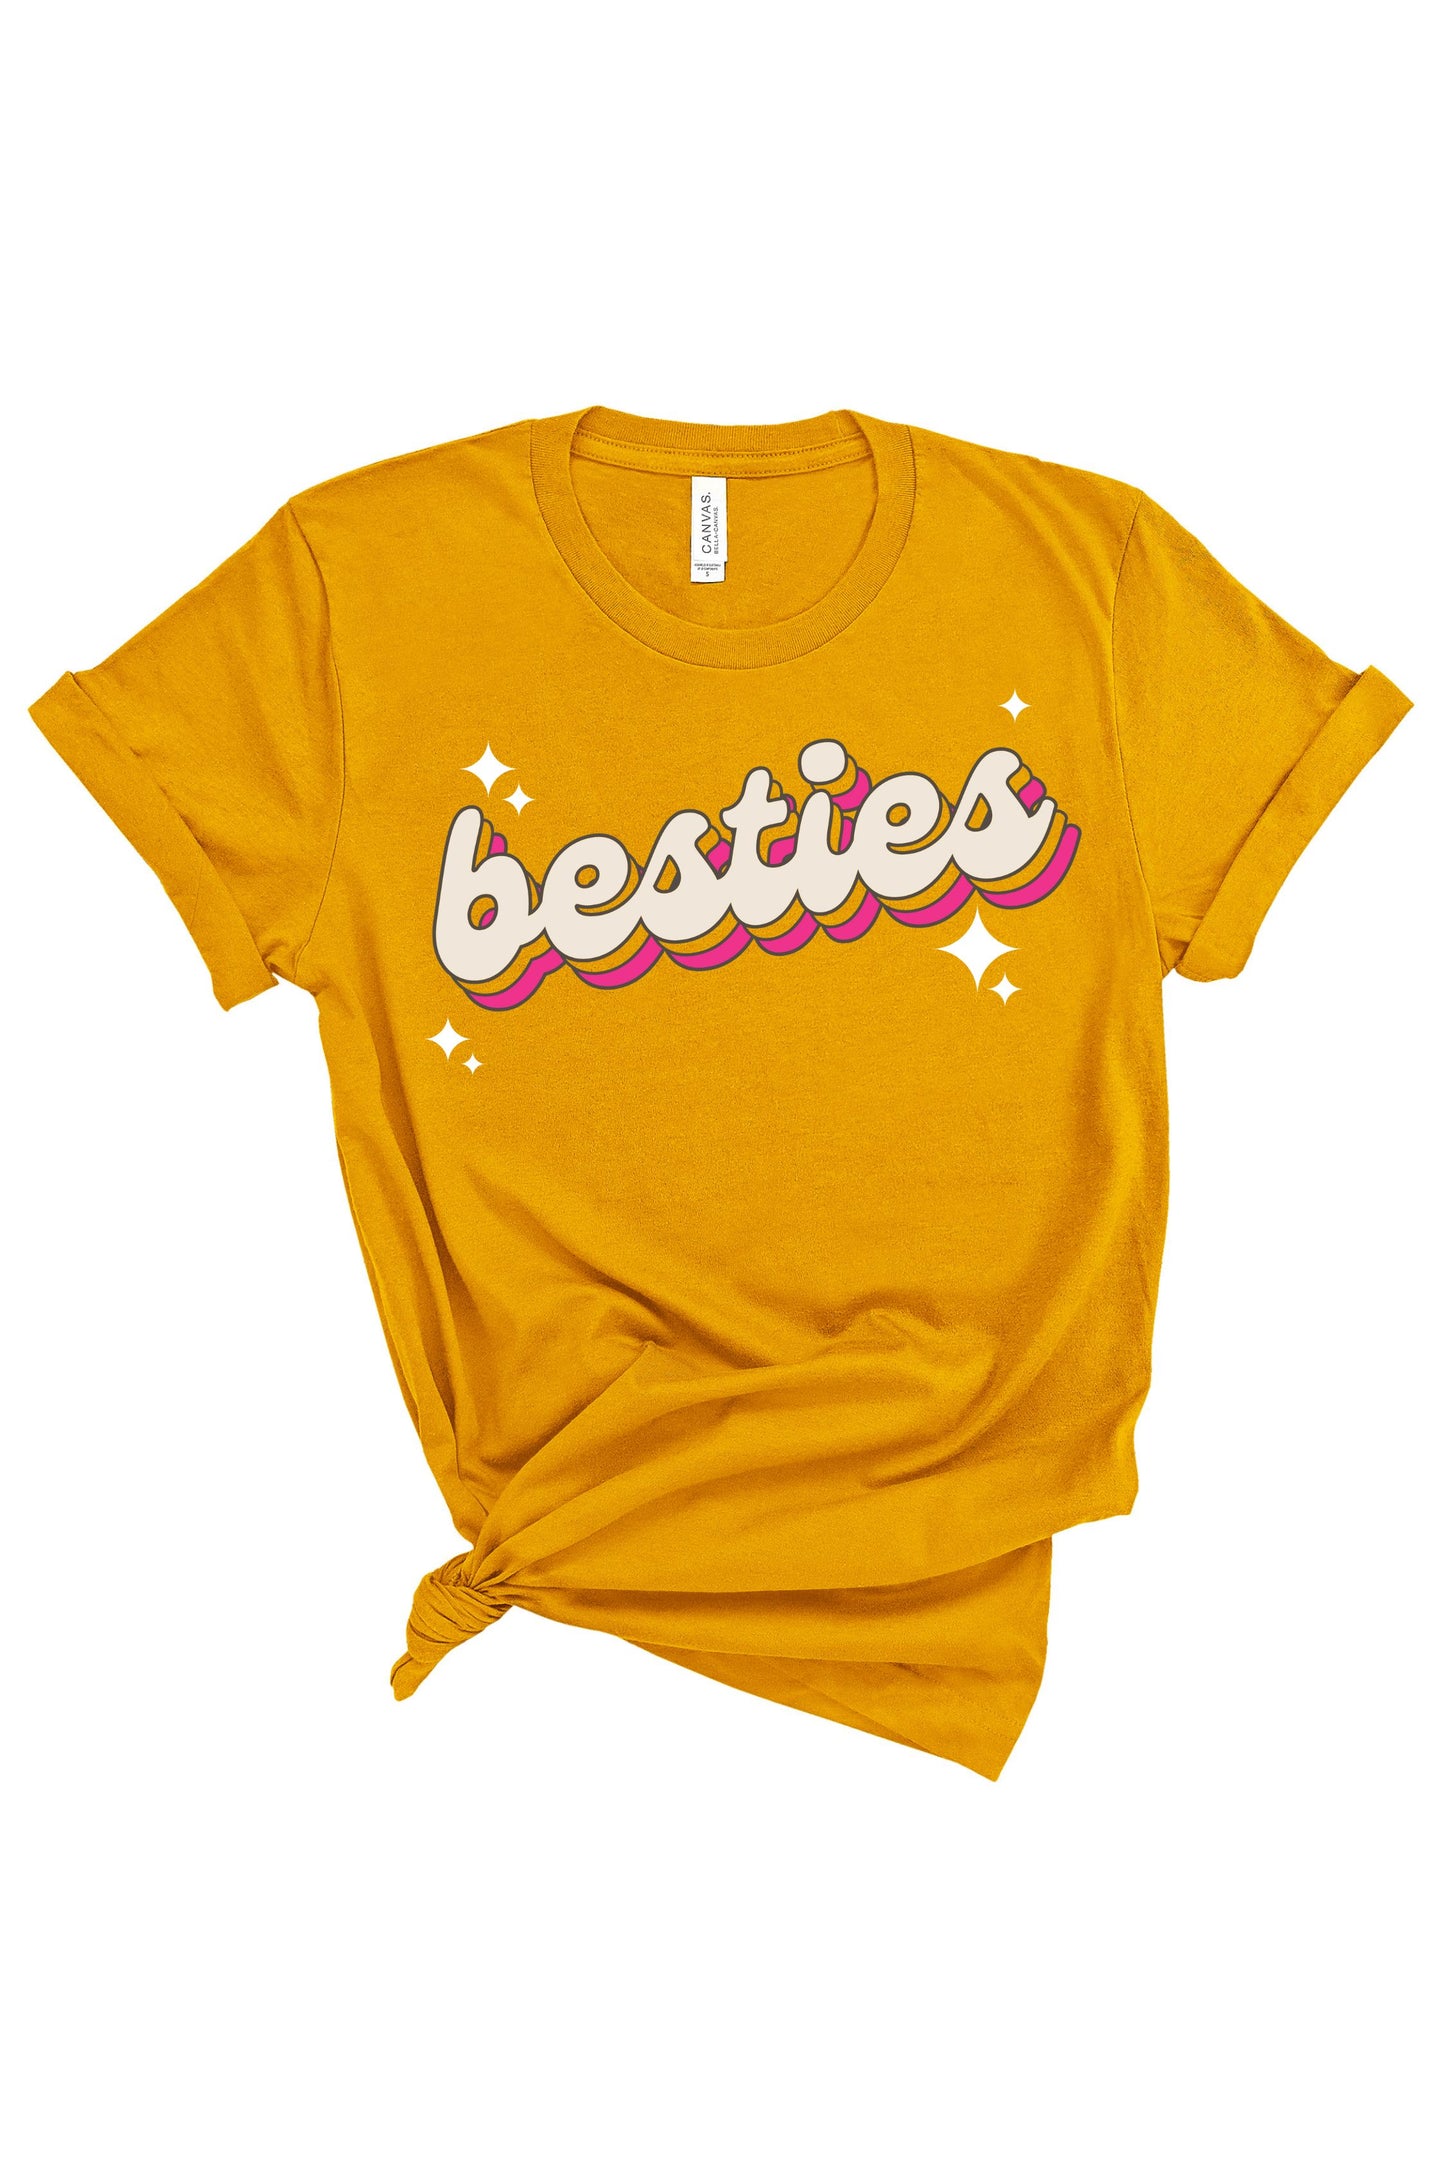 Besties | Tee | Adult-Sister Shirts-Sister Shirts, Cute & Custom Tees for Mama & Littles in Trussville, Alabama.